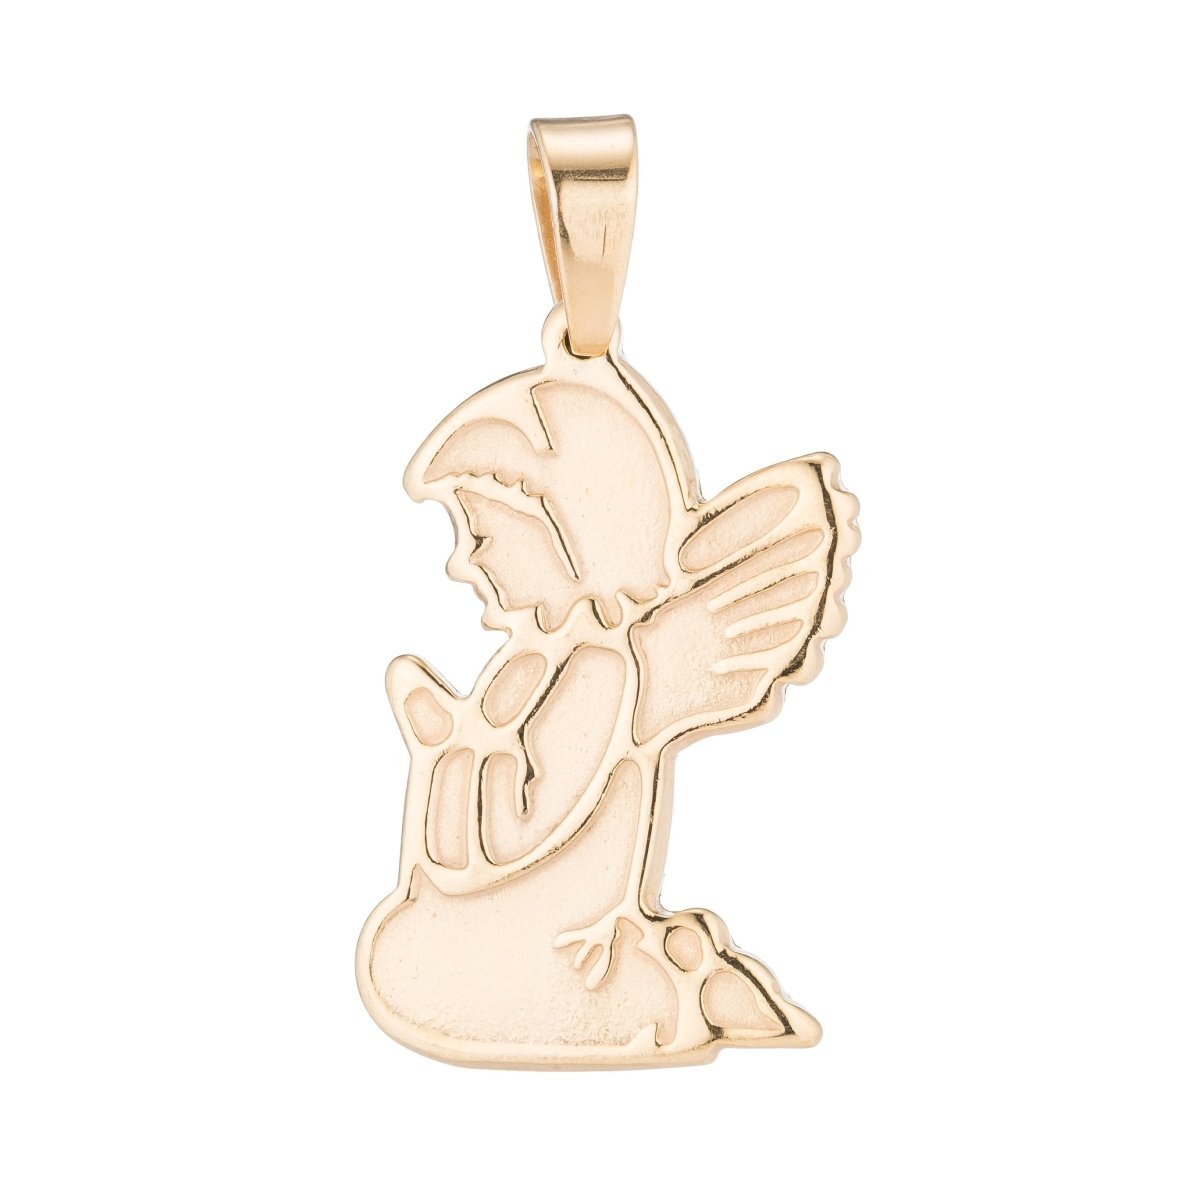 Praying Angel, Guardian Angel, Pray daughter, Protection, Heaven Necklace Pendant Charm Bead Bails Findings for Jewelry Making J-515 - DLUXCA